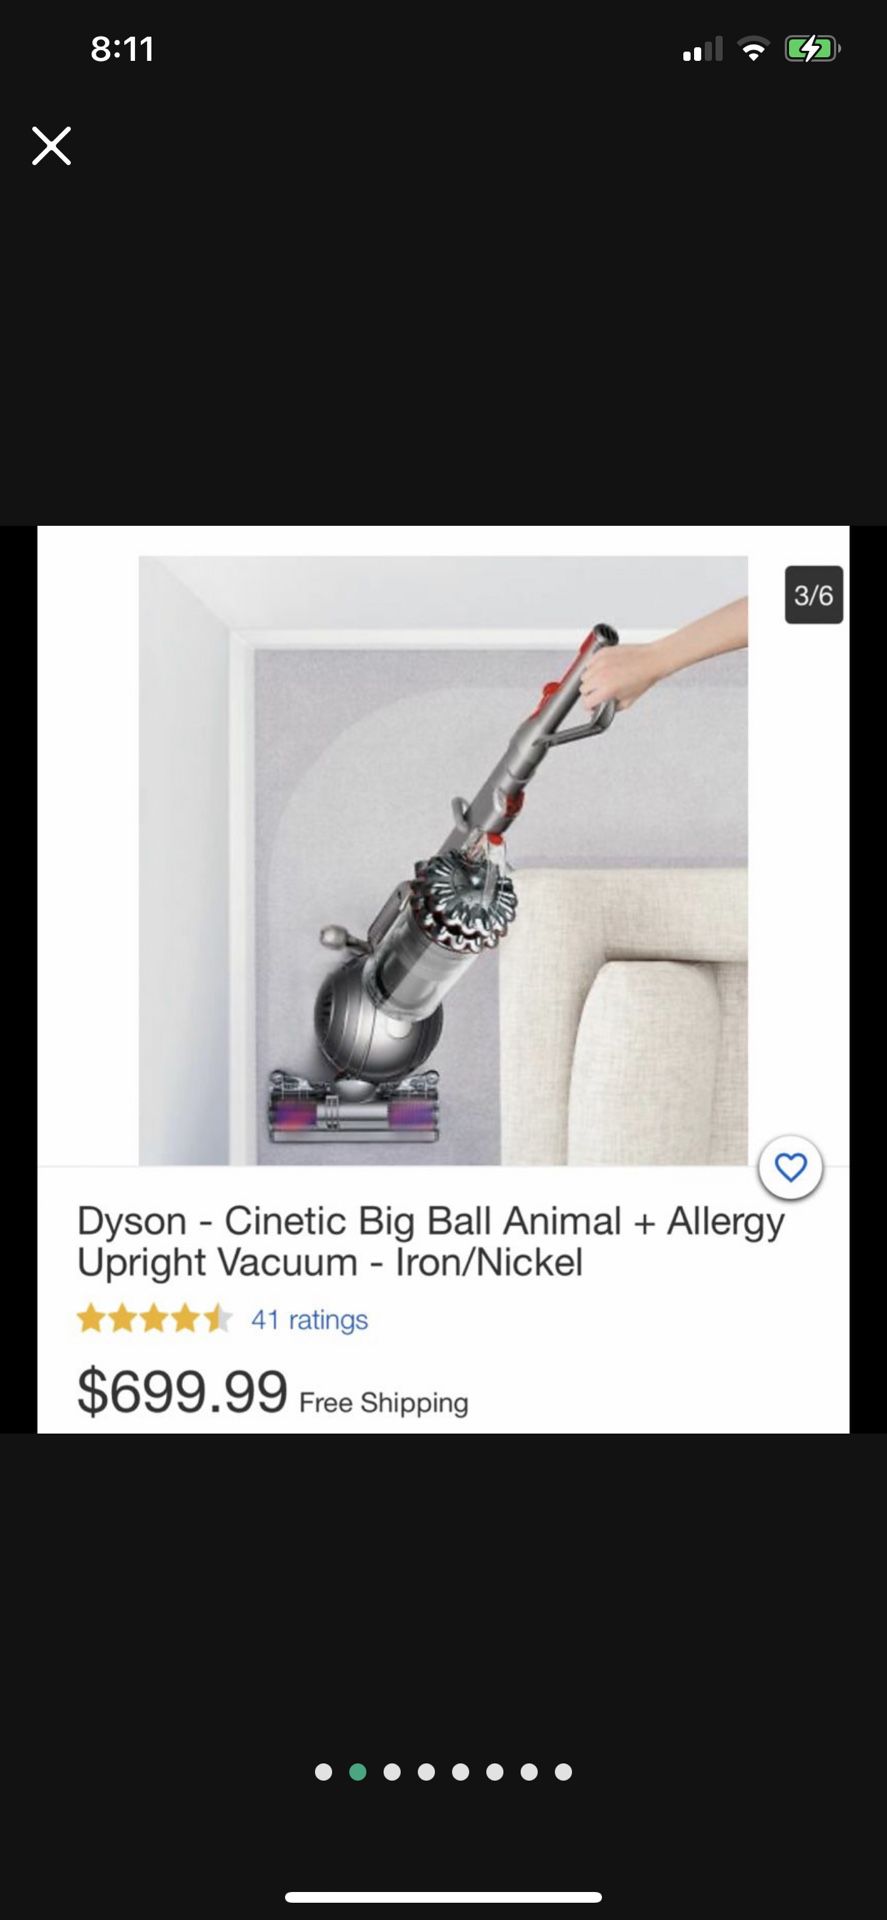 DYSON - CINETIC BIG BALL ANIMAL + ALLERGY UPRIGHT VACUUM - IRON/NICKE best  Vac out there new new  $420 OBO   New 